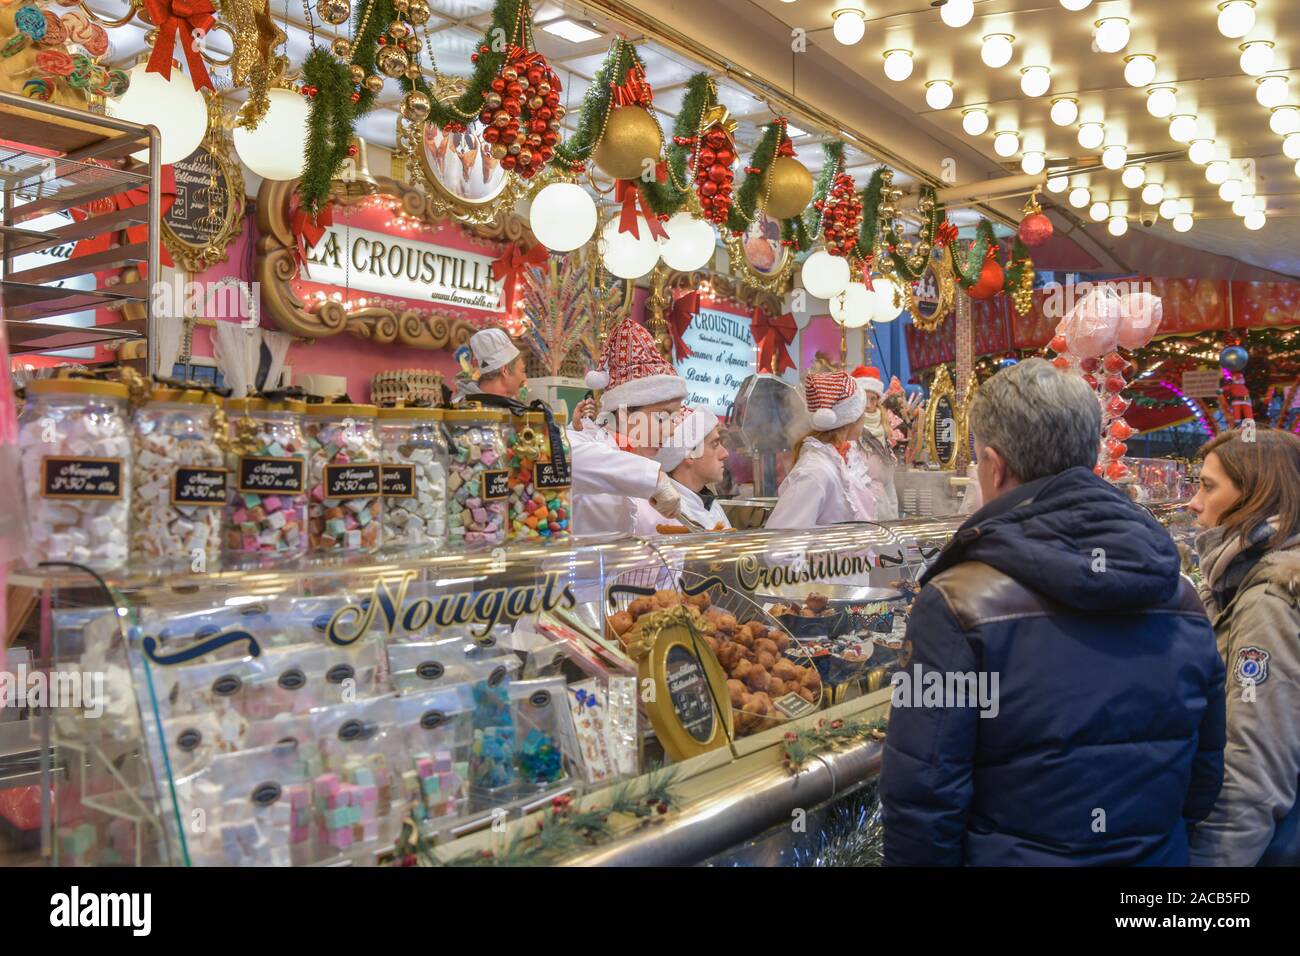 ROUEN, FRANCE - DECEMBER 16, 2018: Christmas decorated Kiosk with sweets at the Fair in Europe Stock Photo